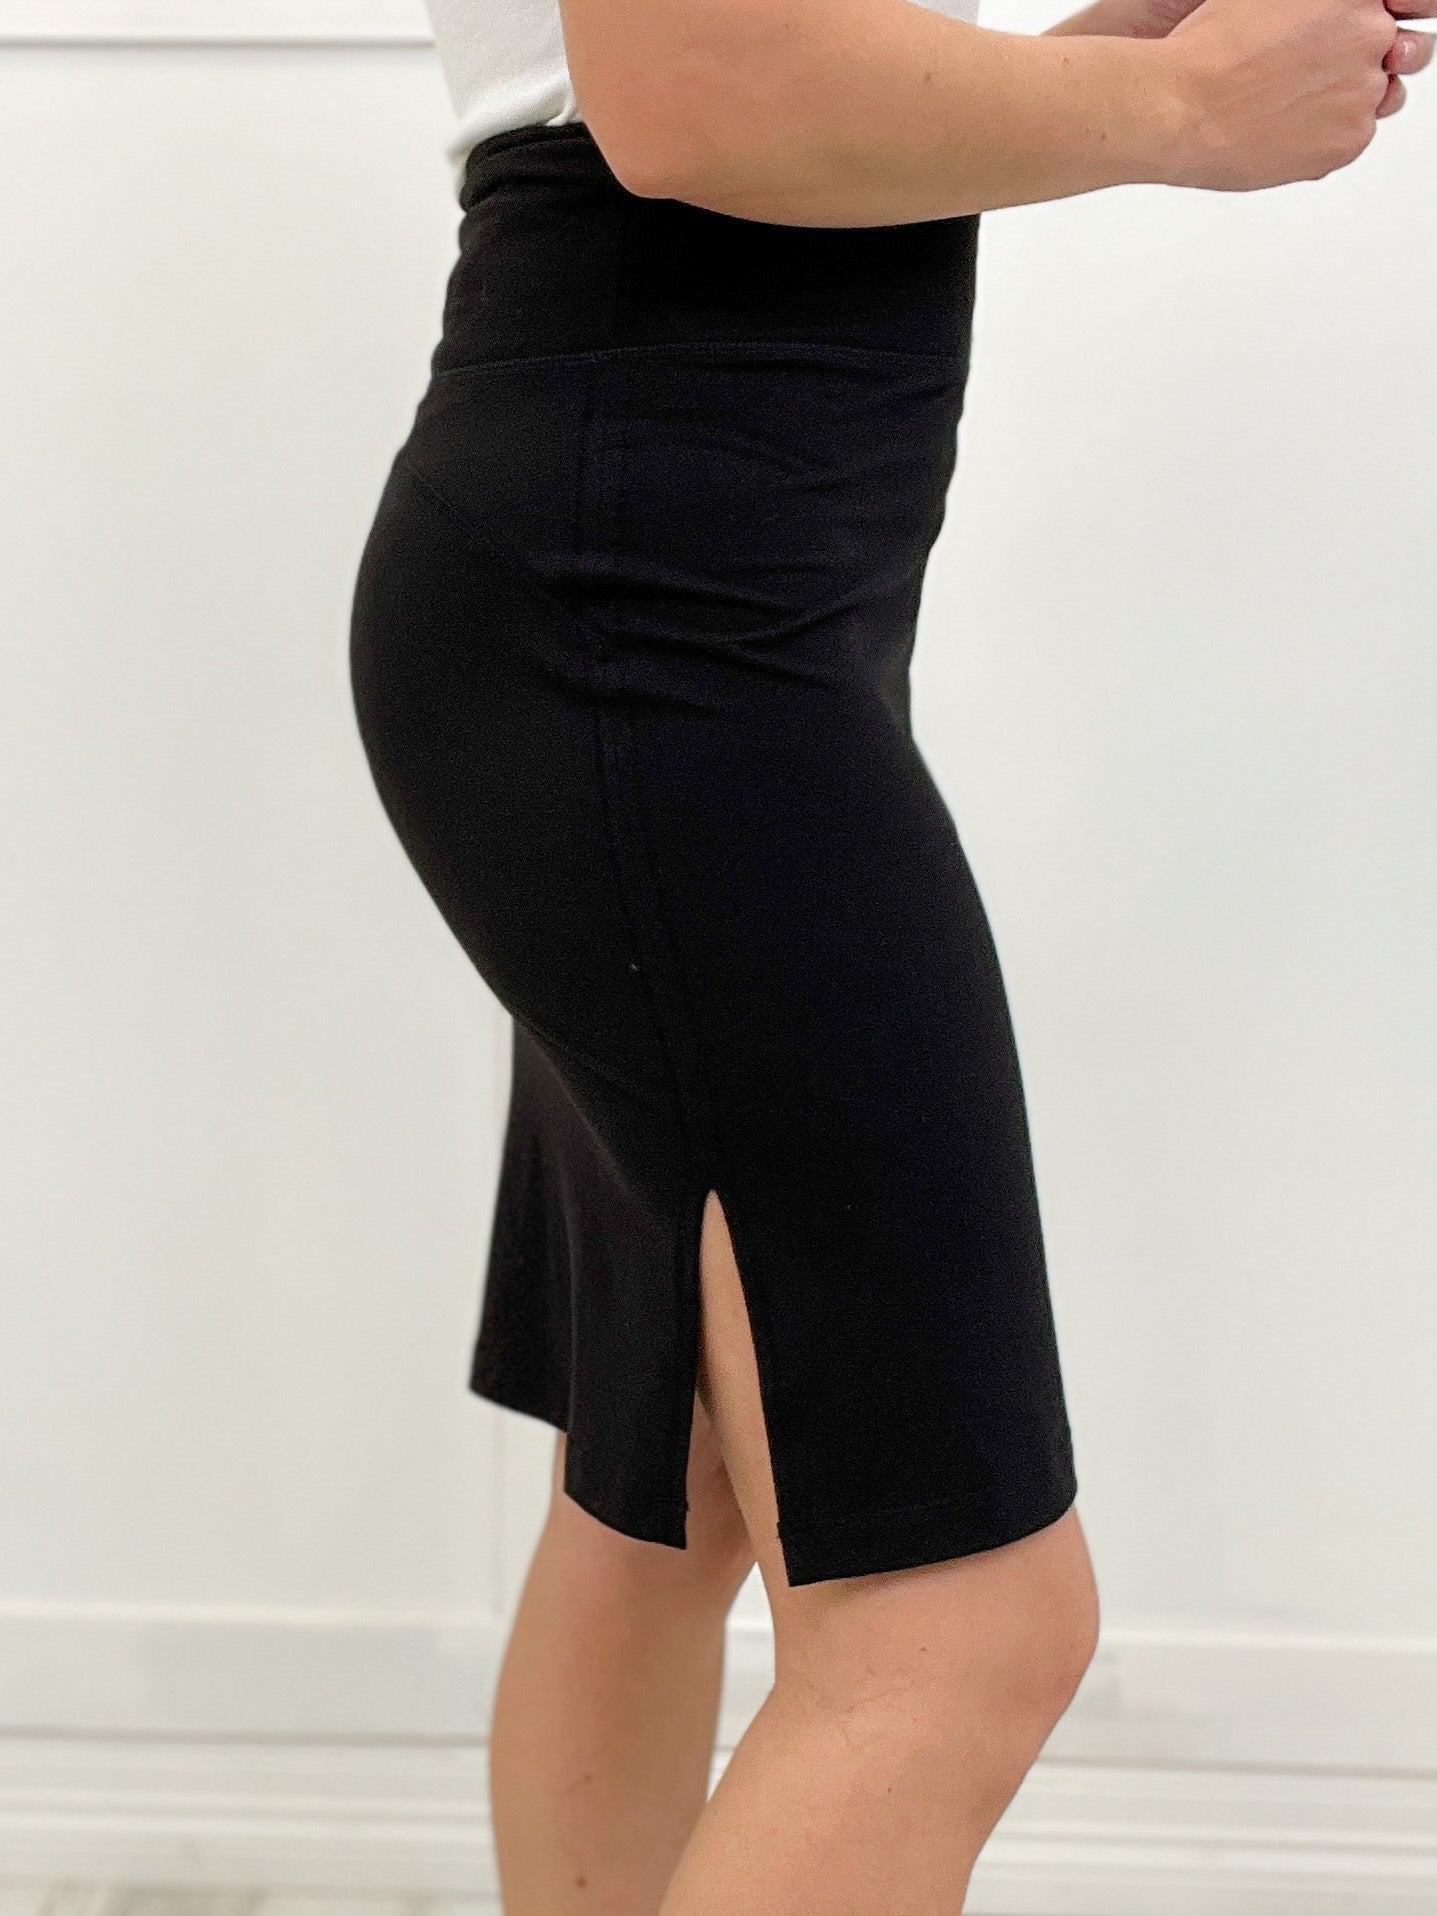 Only $12.99!! High Waist Pencil Skirt with Side Slit